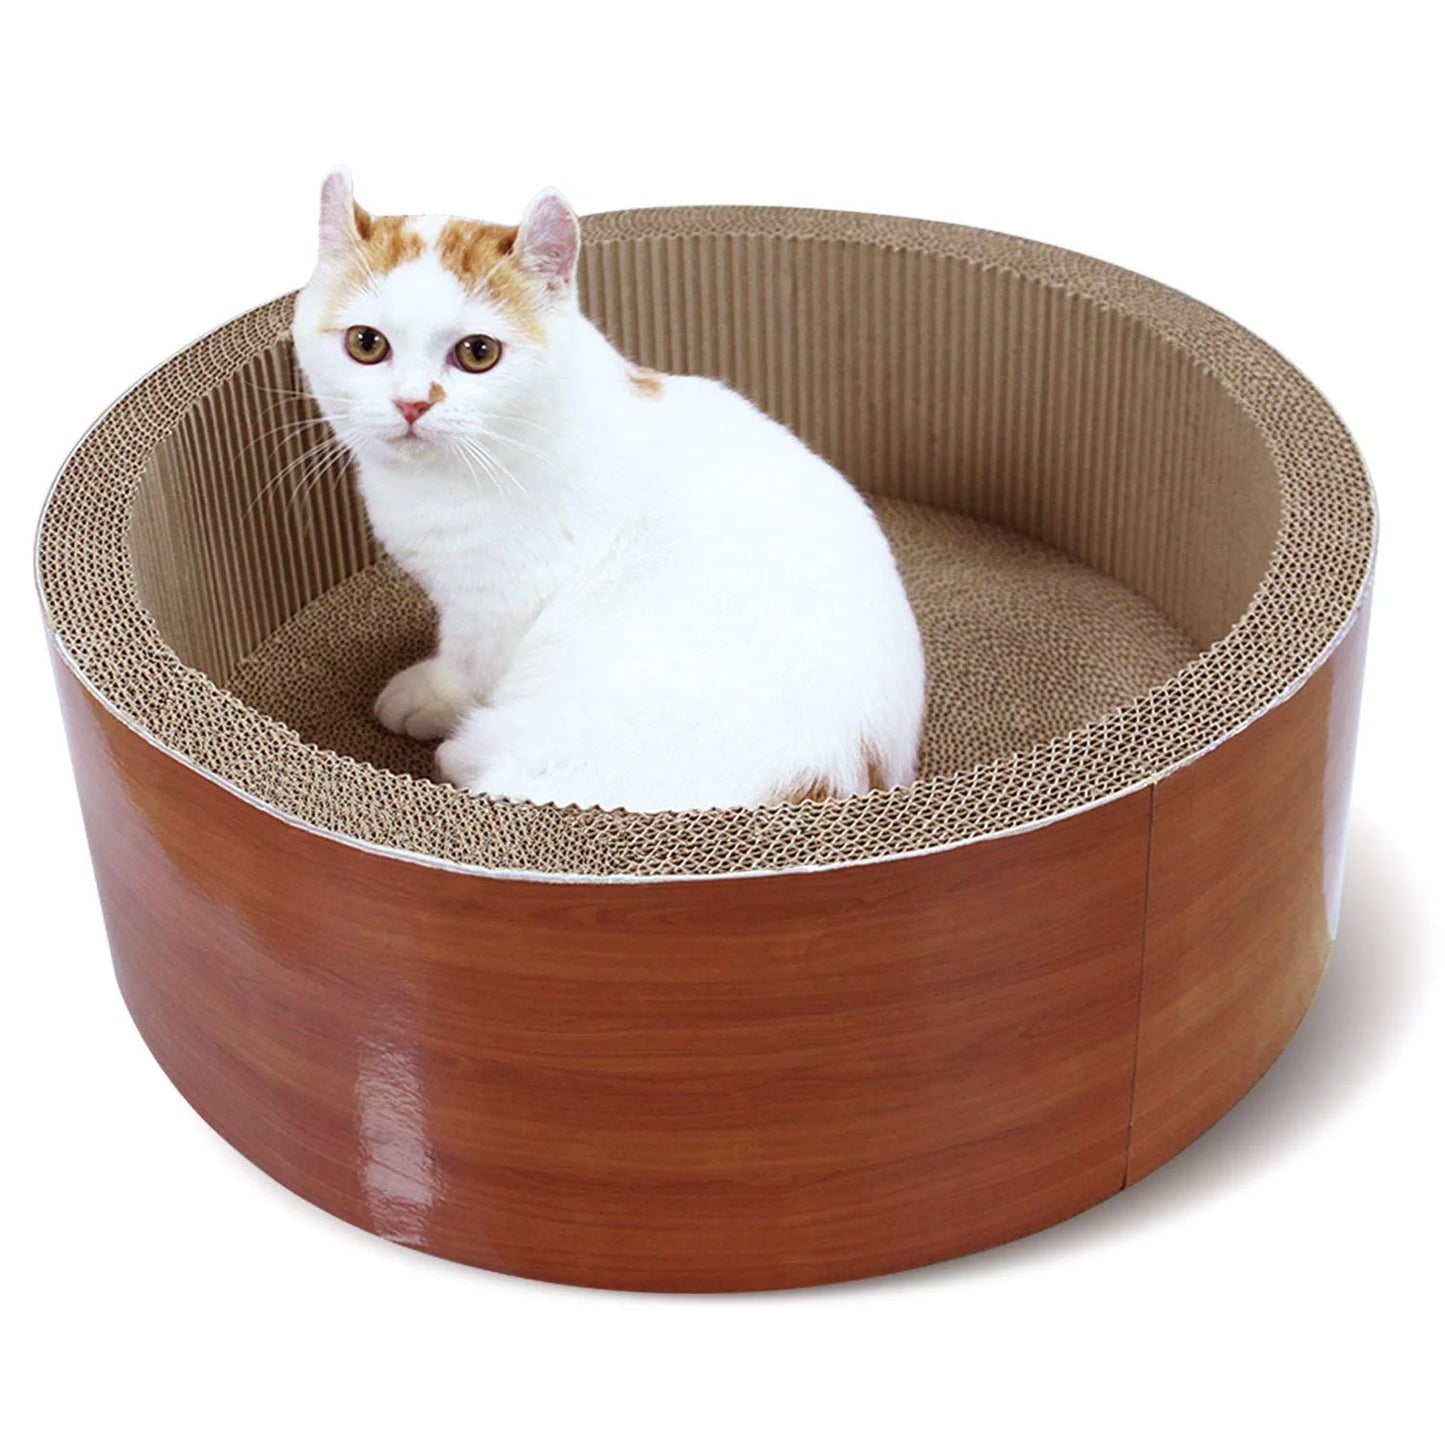 Scratchme Cat Scratch Cardboard Deluxe Prevents Furniture Damage & Contains Catnip to Attract Your Cat